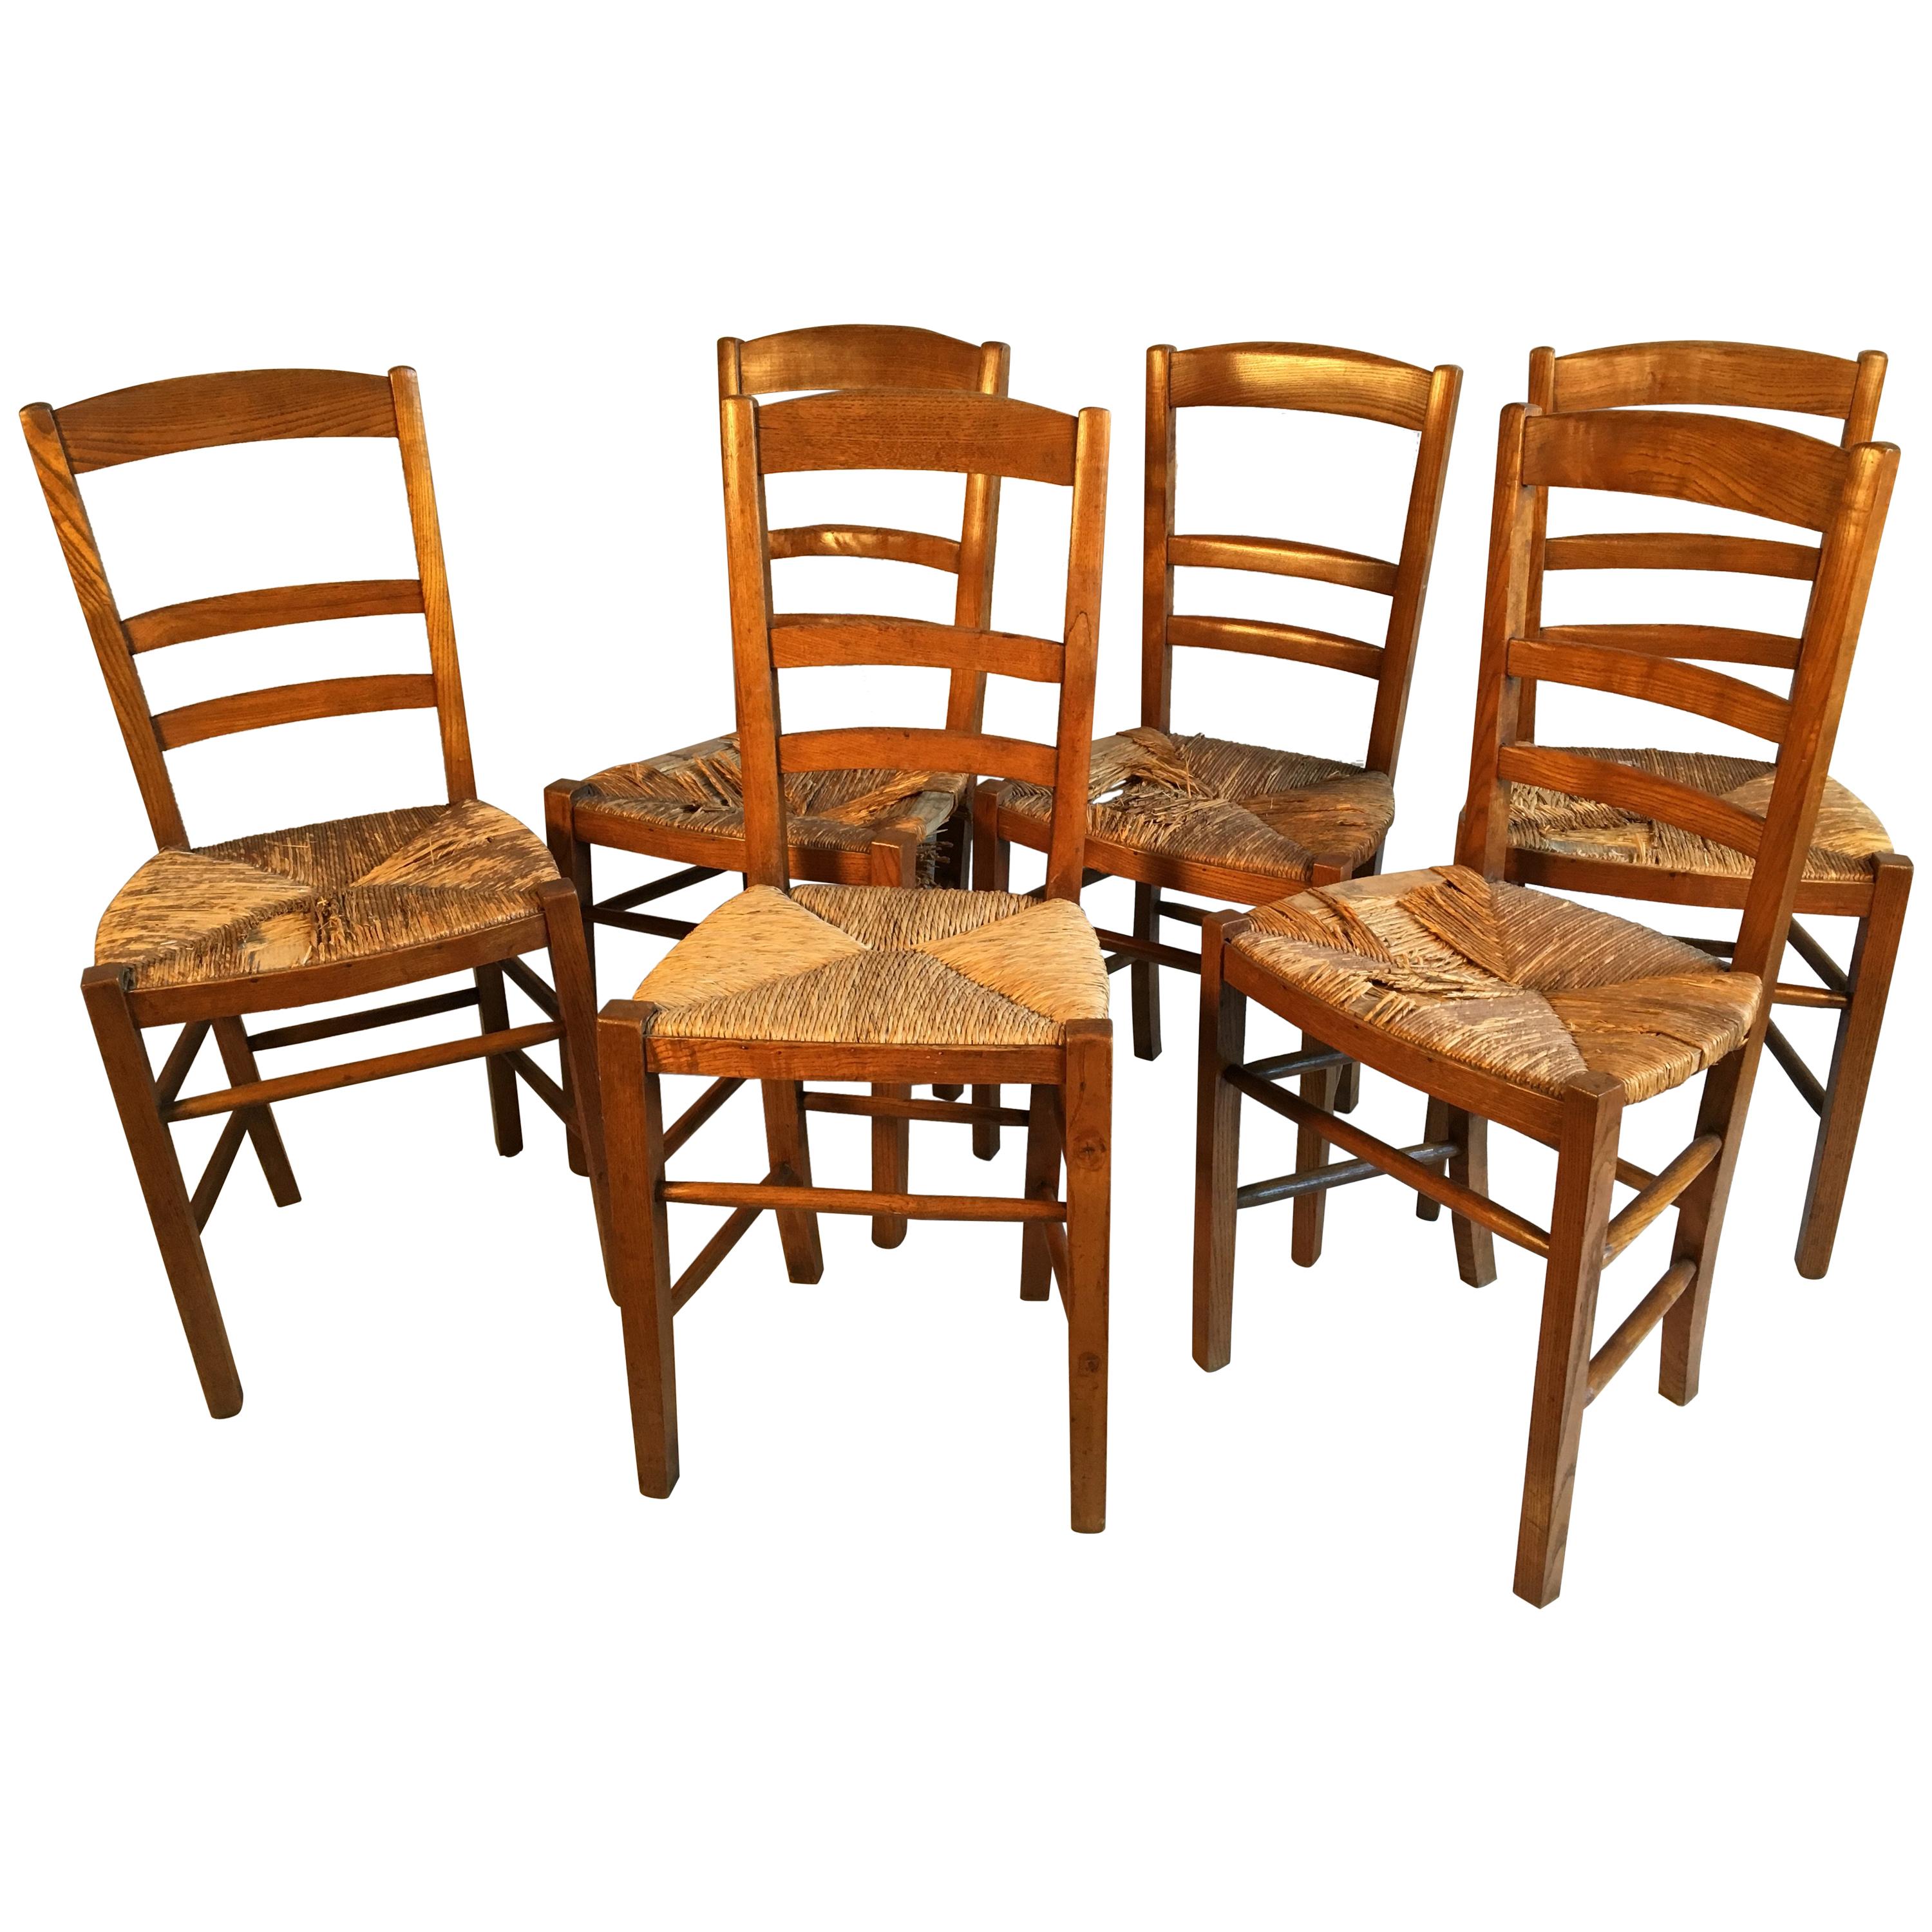 Set of 6 French Country Ladder Back Chairs, Mid-19th Century